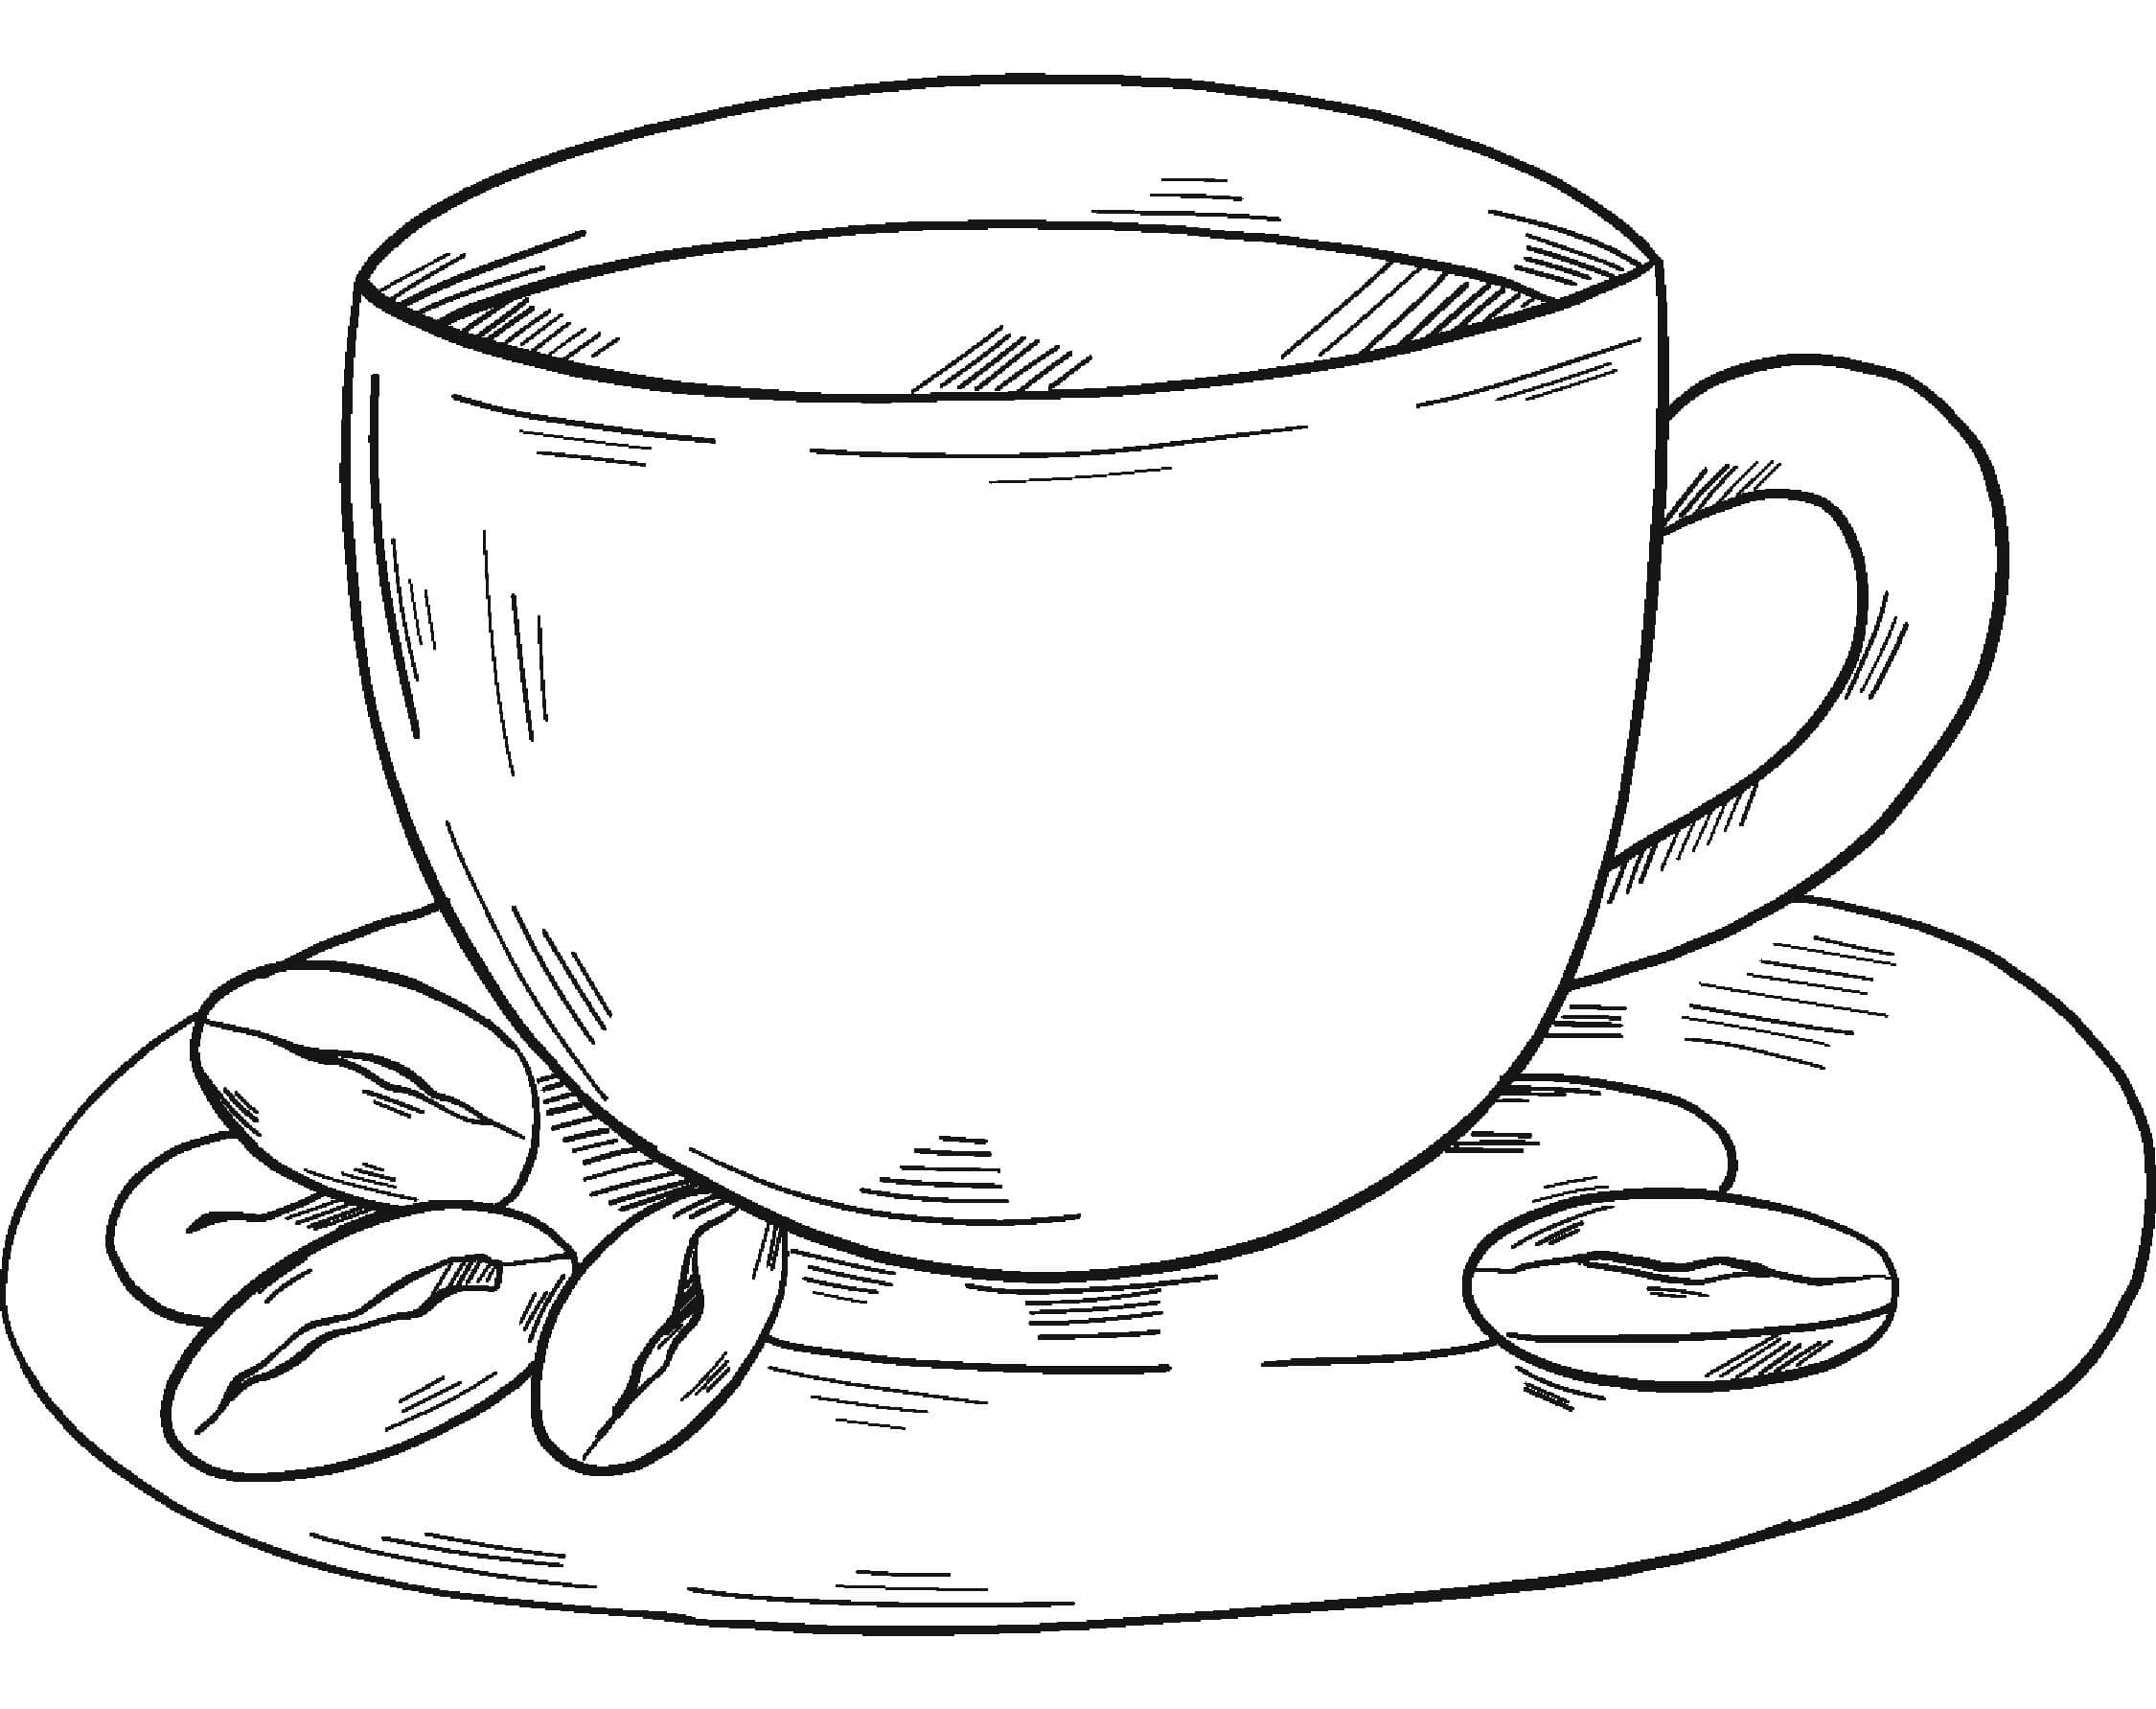 Hand Drawn Cup of Coffee coloring page - Download, Print or Color ...